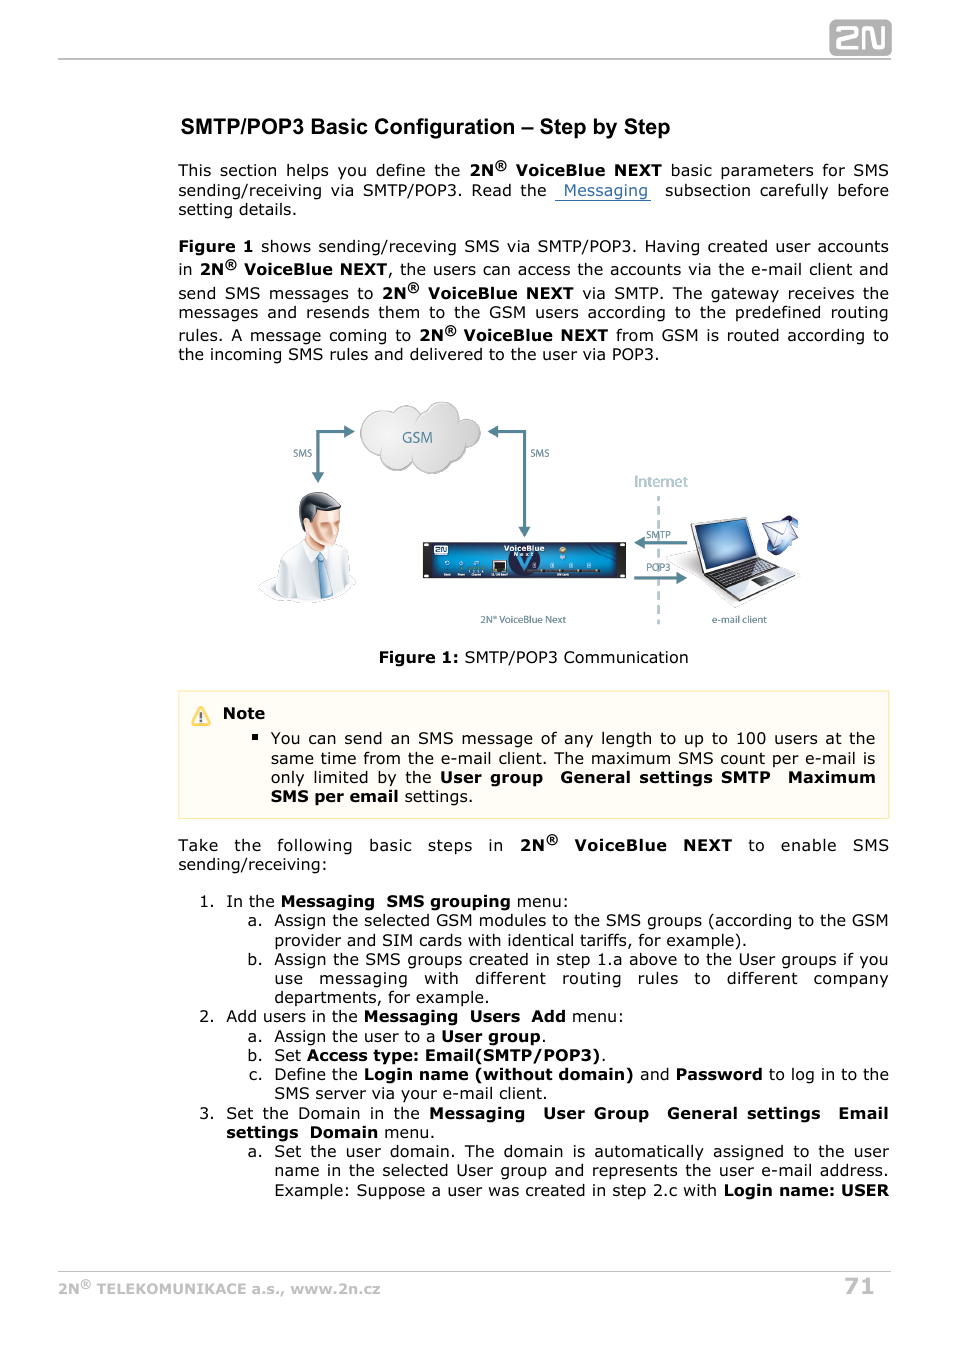 Smtp/pop3 basic configuration – step by step | 2N VoiceBlue Next v3.6 User Manual | Page 71 / 110